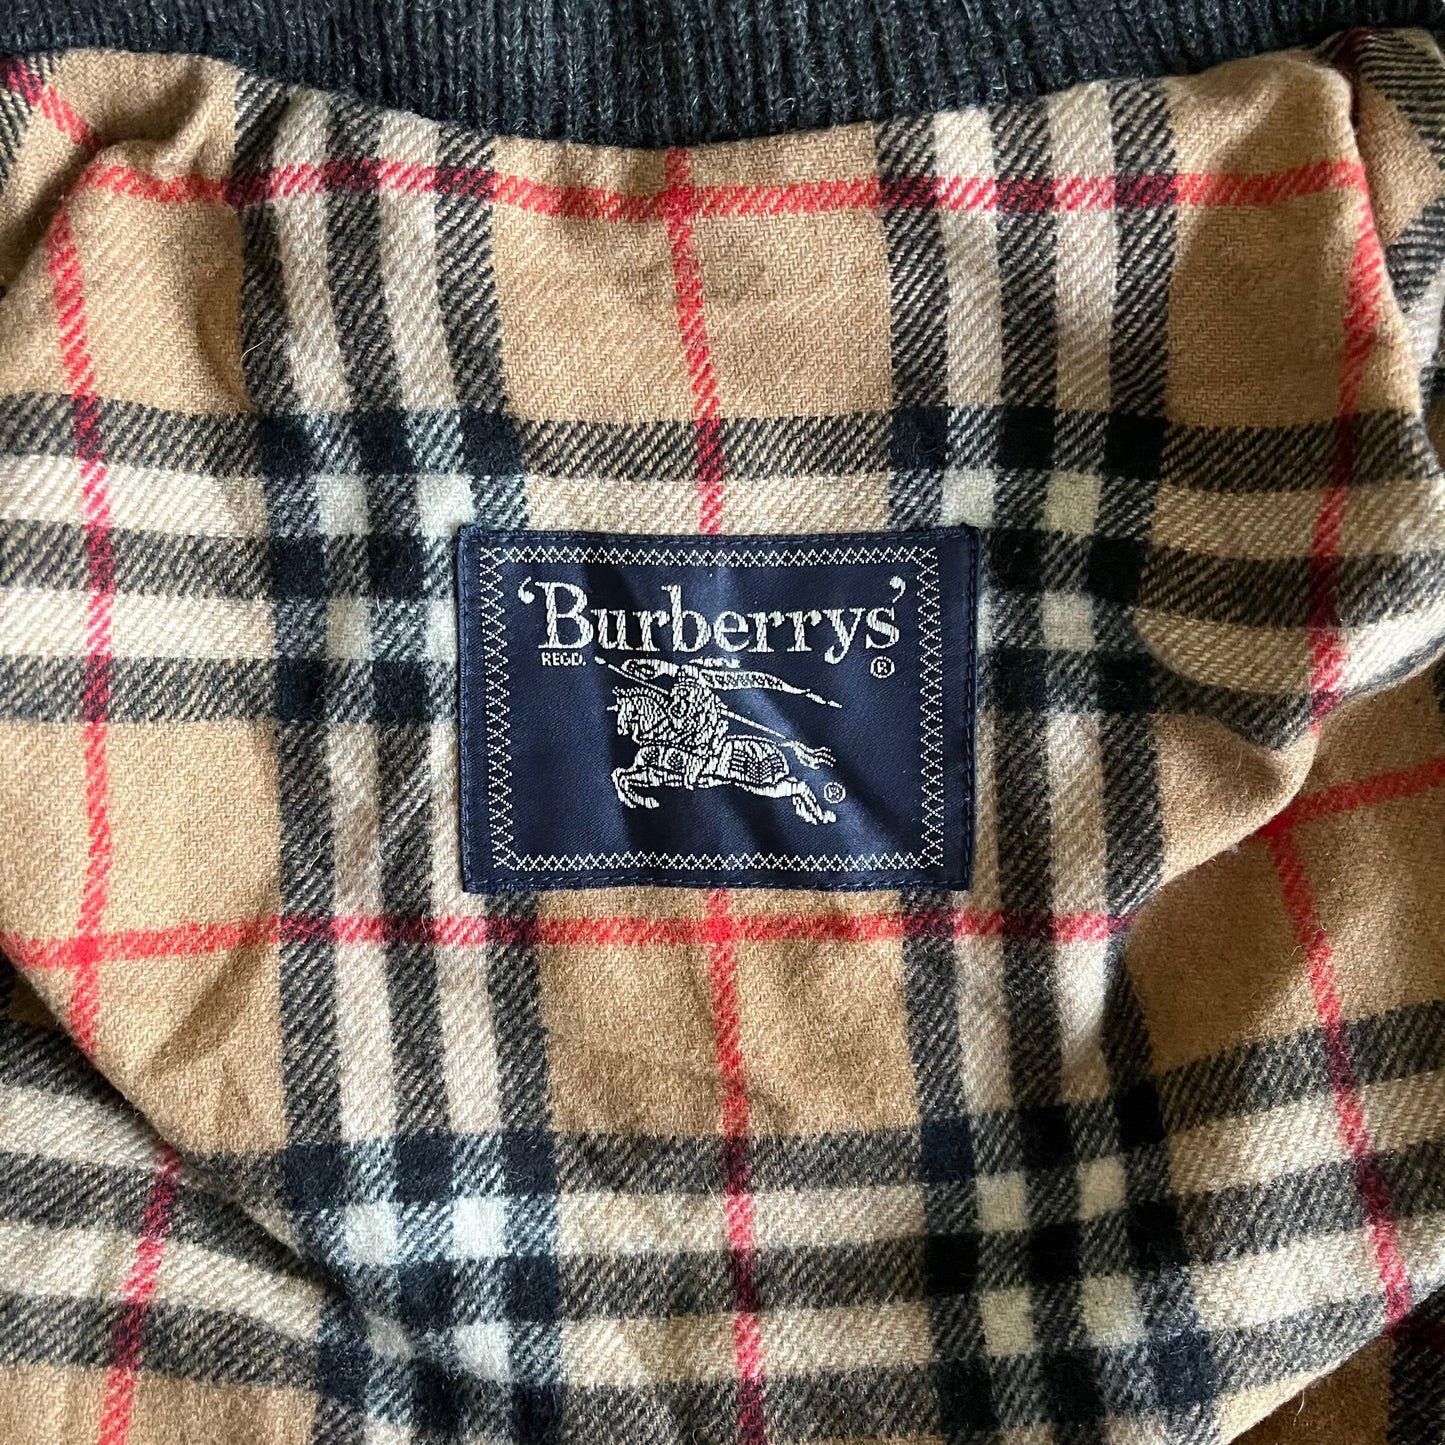 Vintage 1980s Burberry Green Leather Jacket With Nova Check Wool Lining Label - Casspios Dream